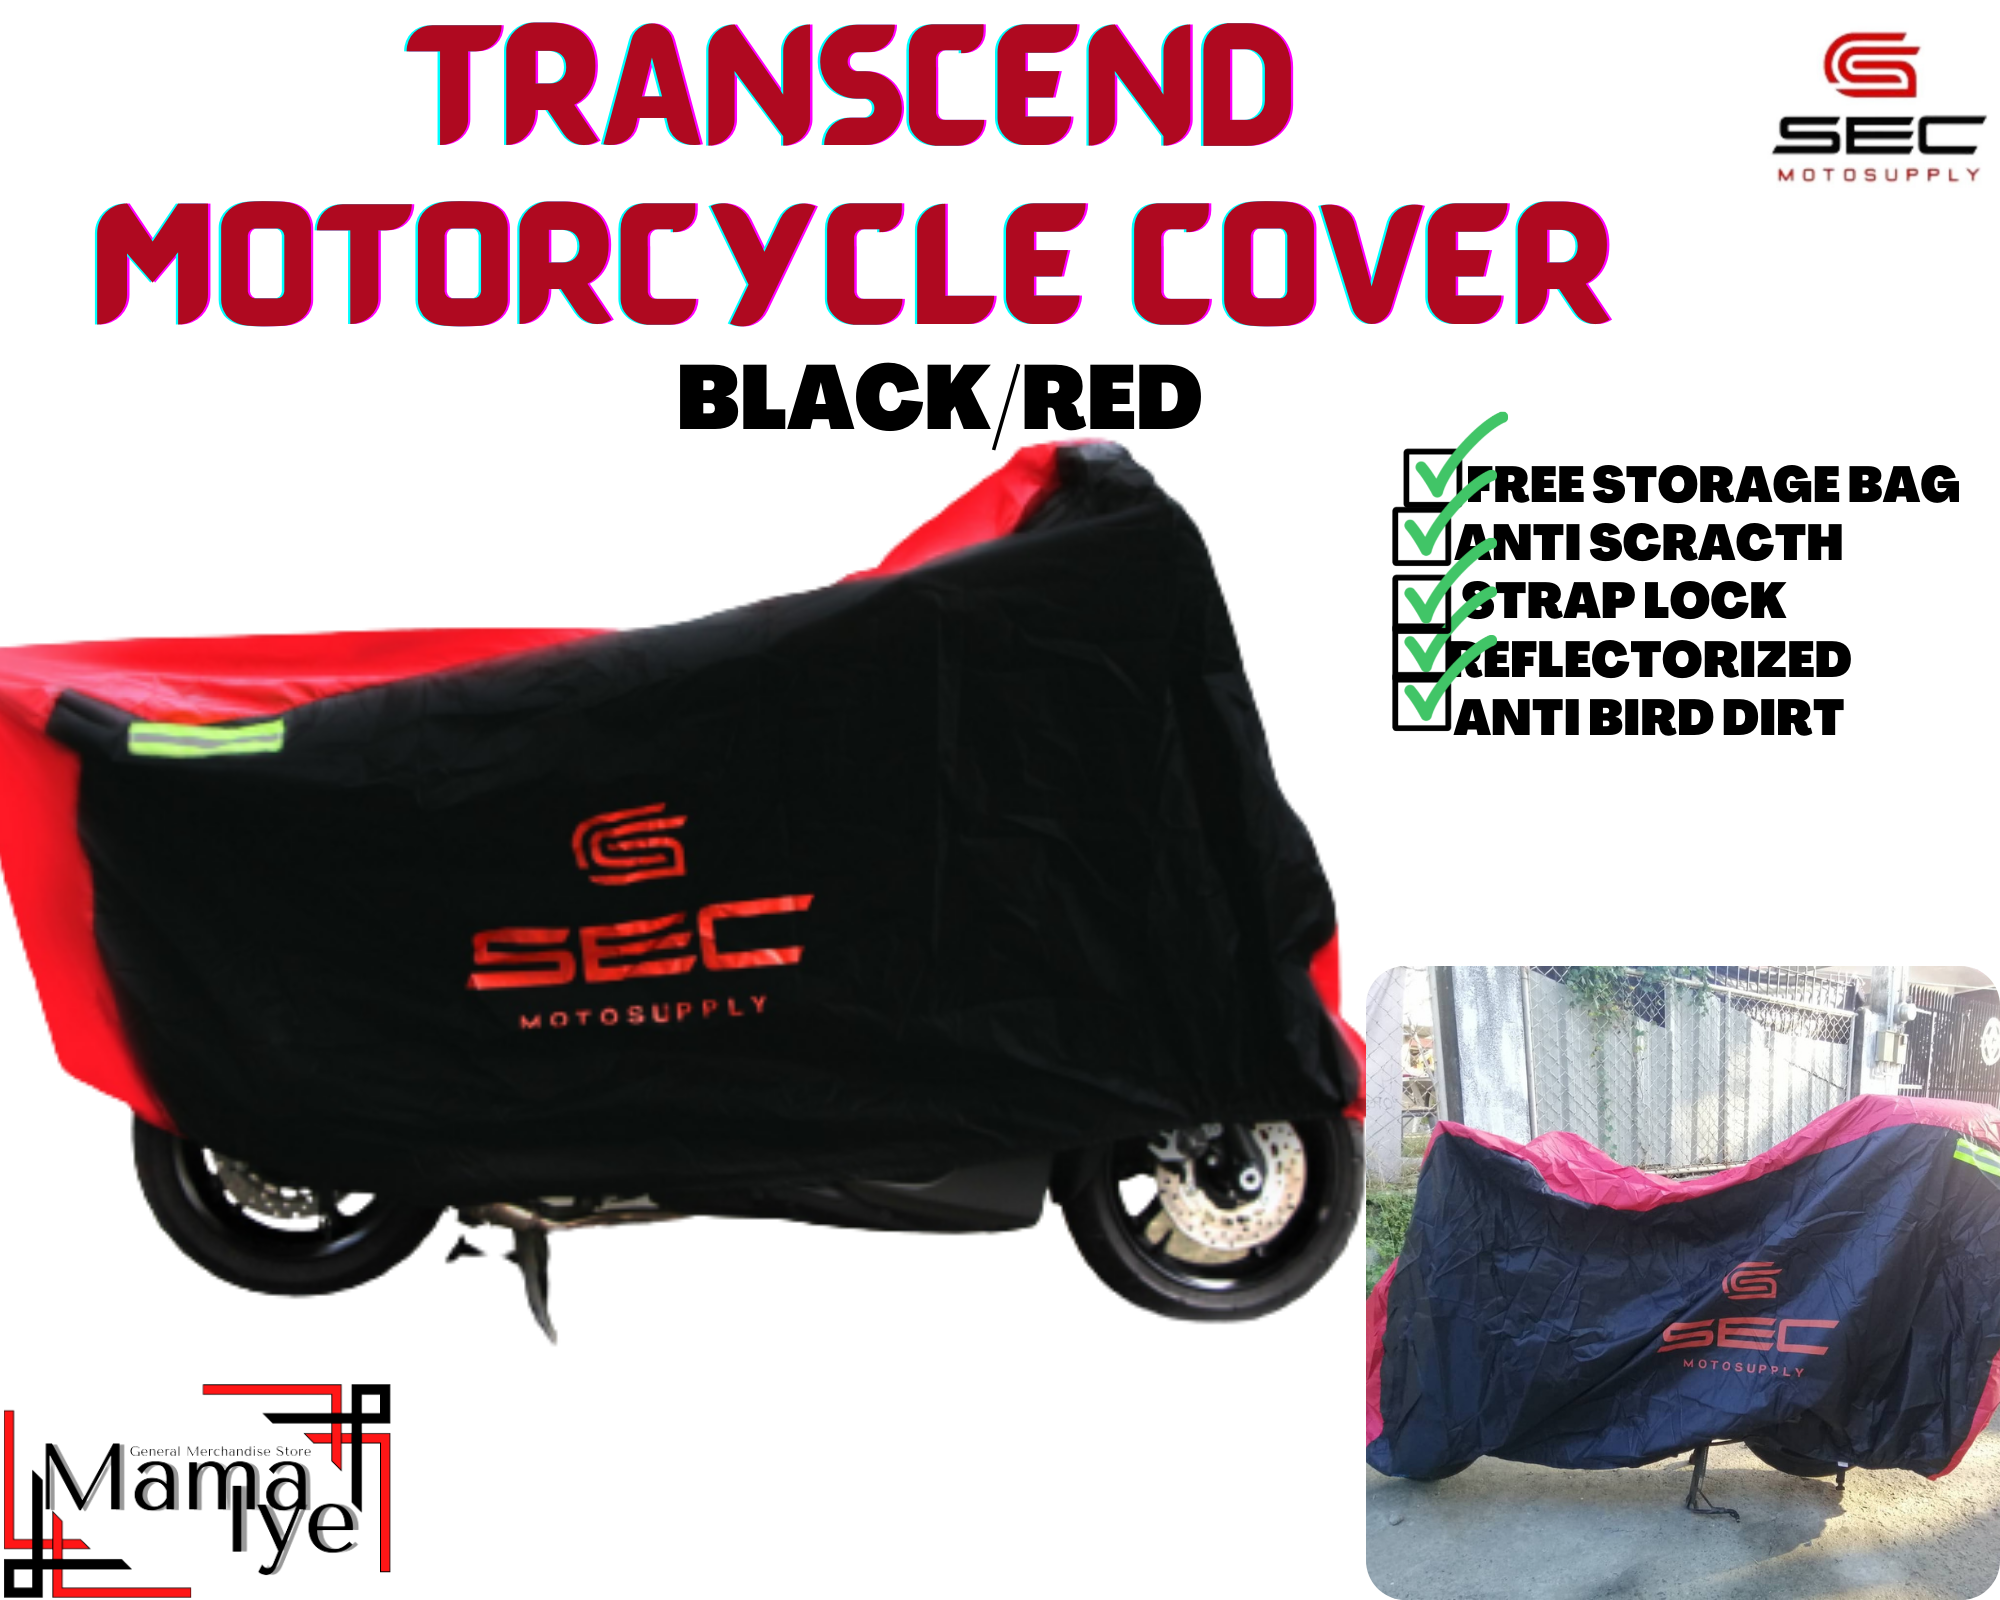 SUZUKI SKYDRIVE CROSSOVER, SEC Transcend Motorcycle Cover 2020 Black/Red  (LARGE)